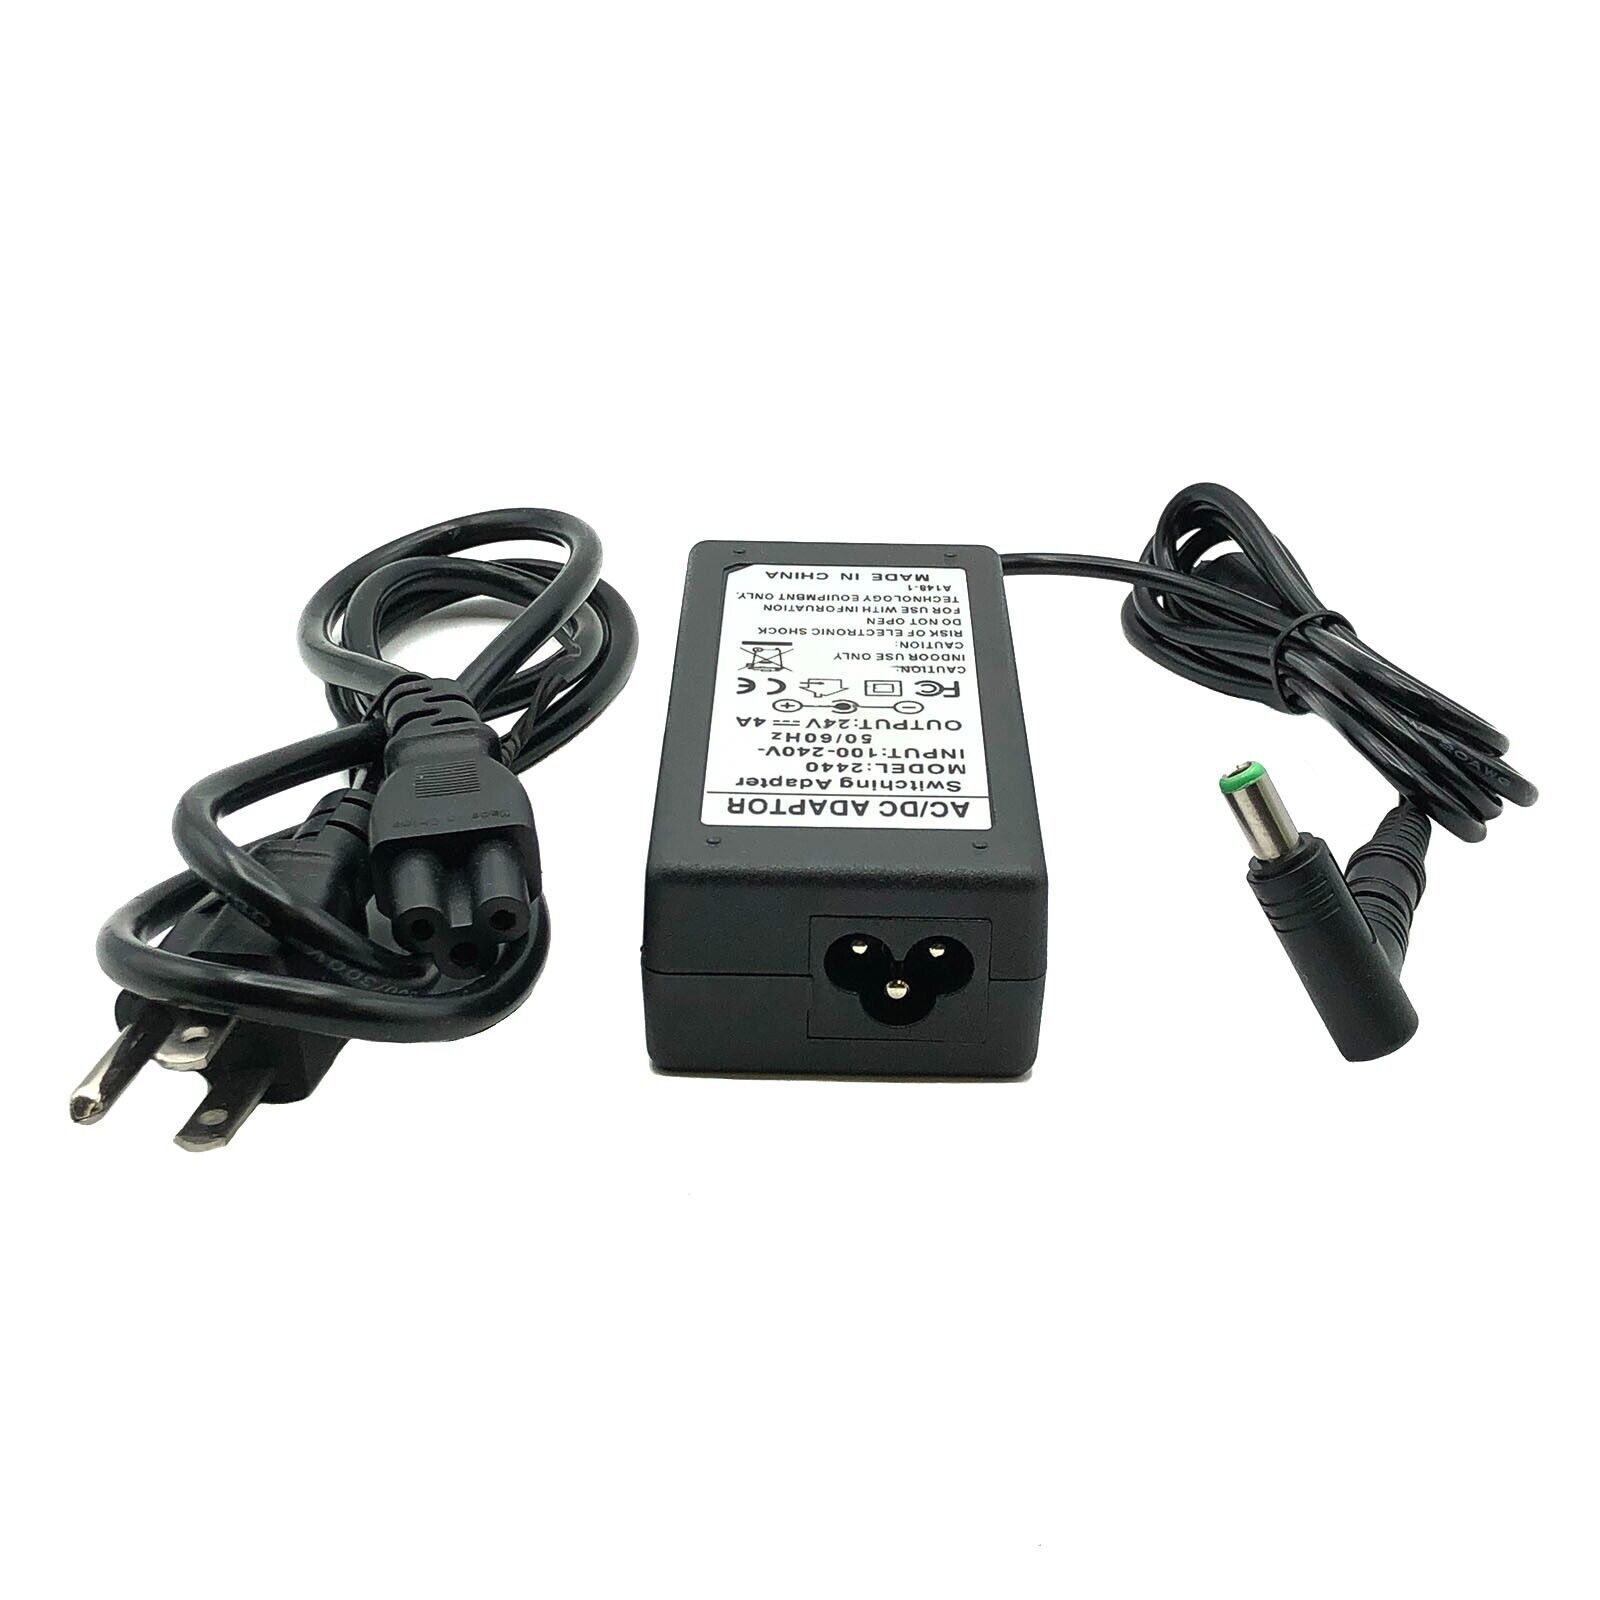 New 24V 4A AC DC Adapter for Zebra GX420t GX430t ZP450 GT800 GT810 Power Supply Compatible Brand: Zebra Connection S - Click Image to Close